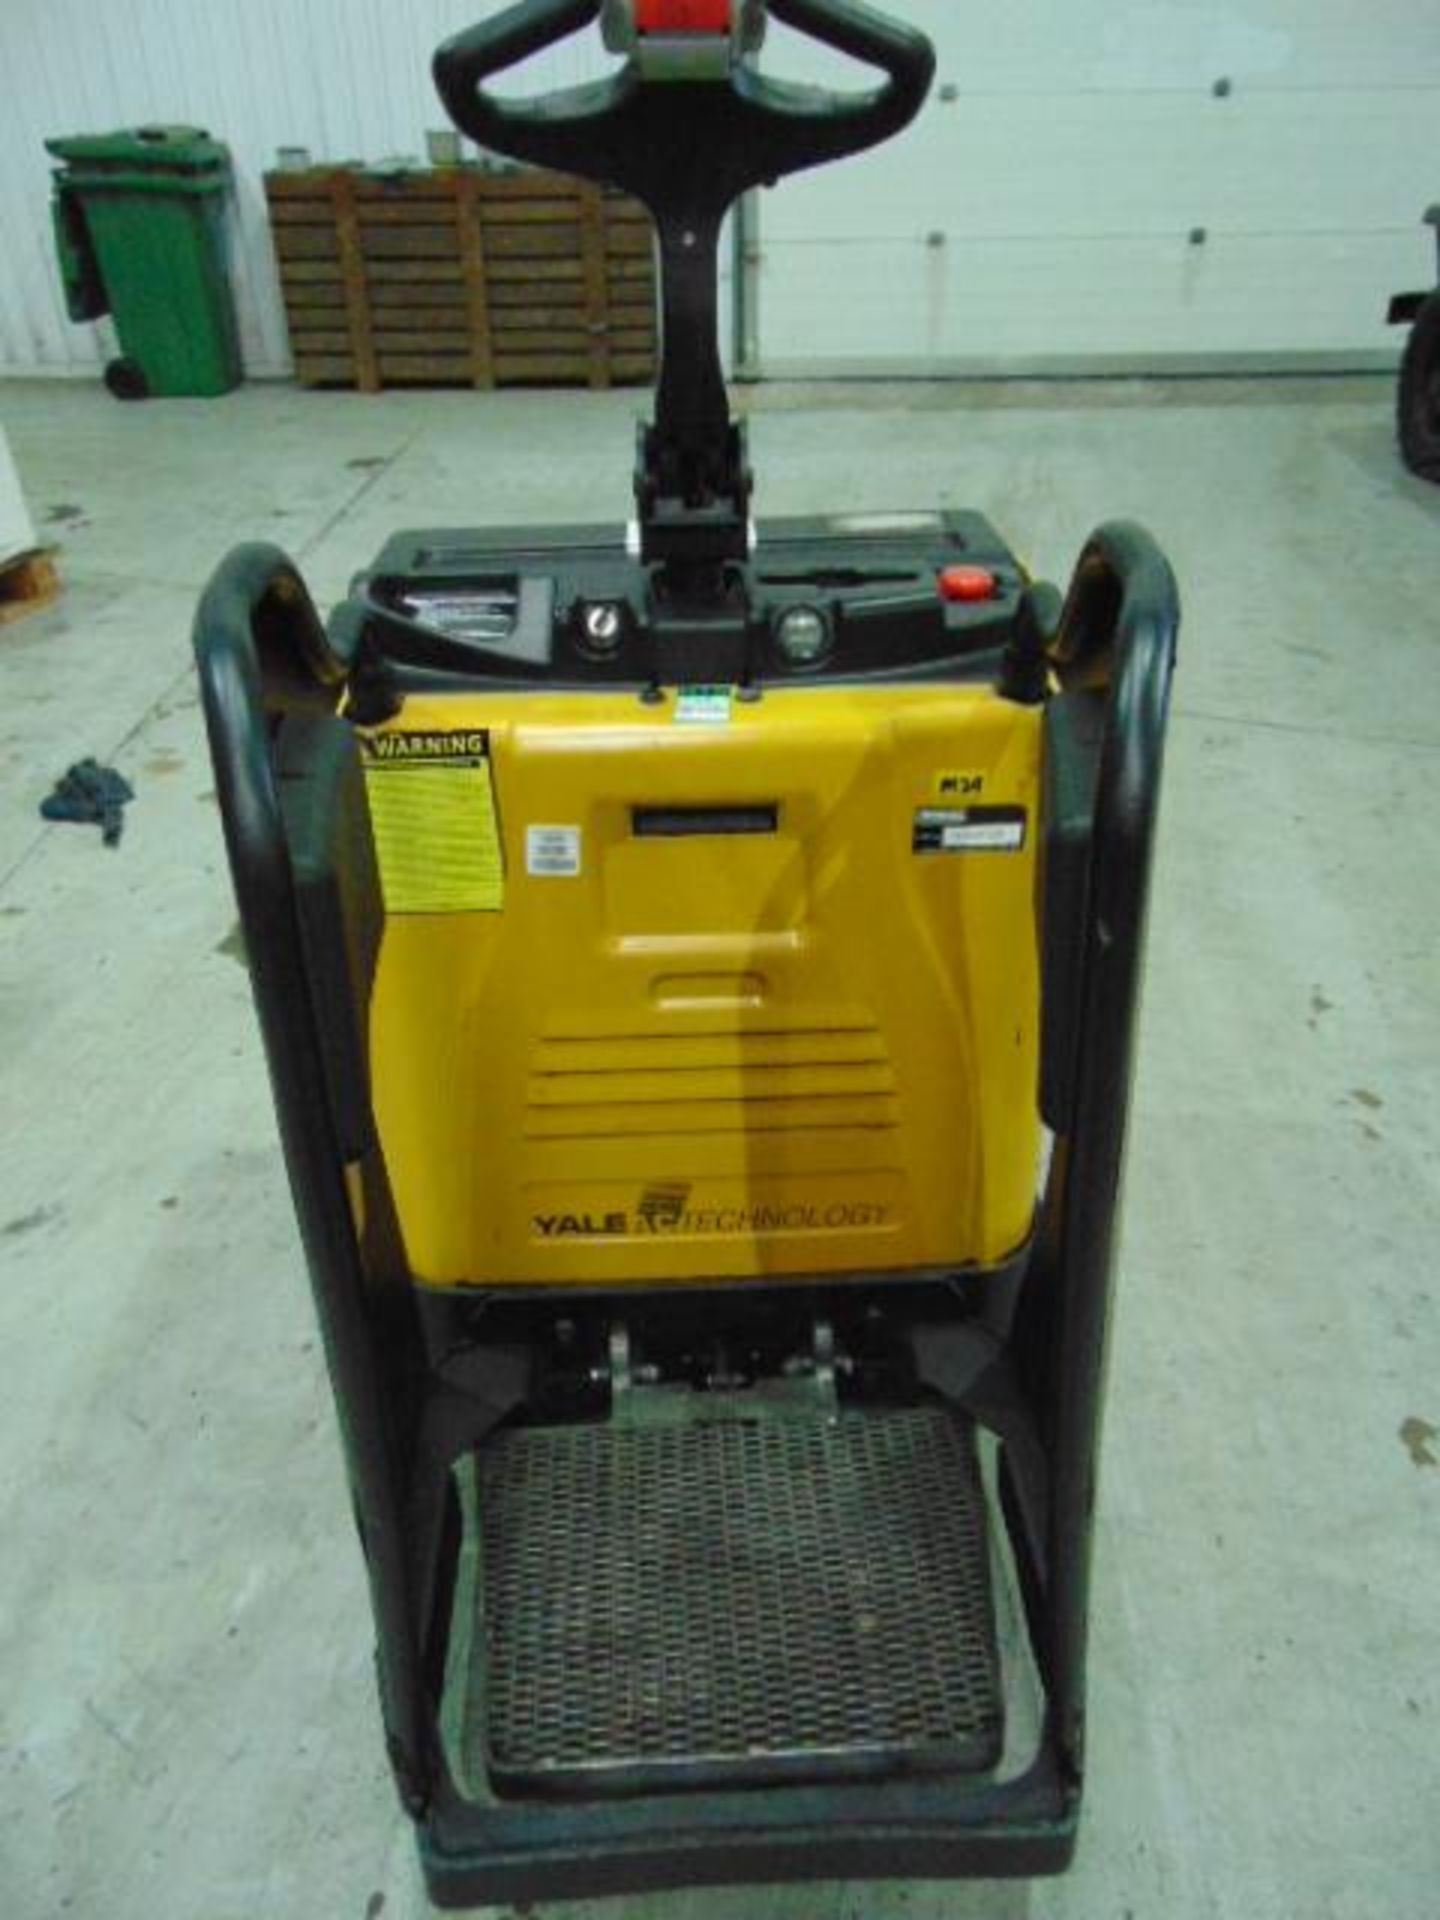 Yale MP20X FBW 2000Kg Self Propelled Electric Pallet Truck - Image 5 of 10